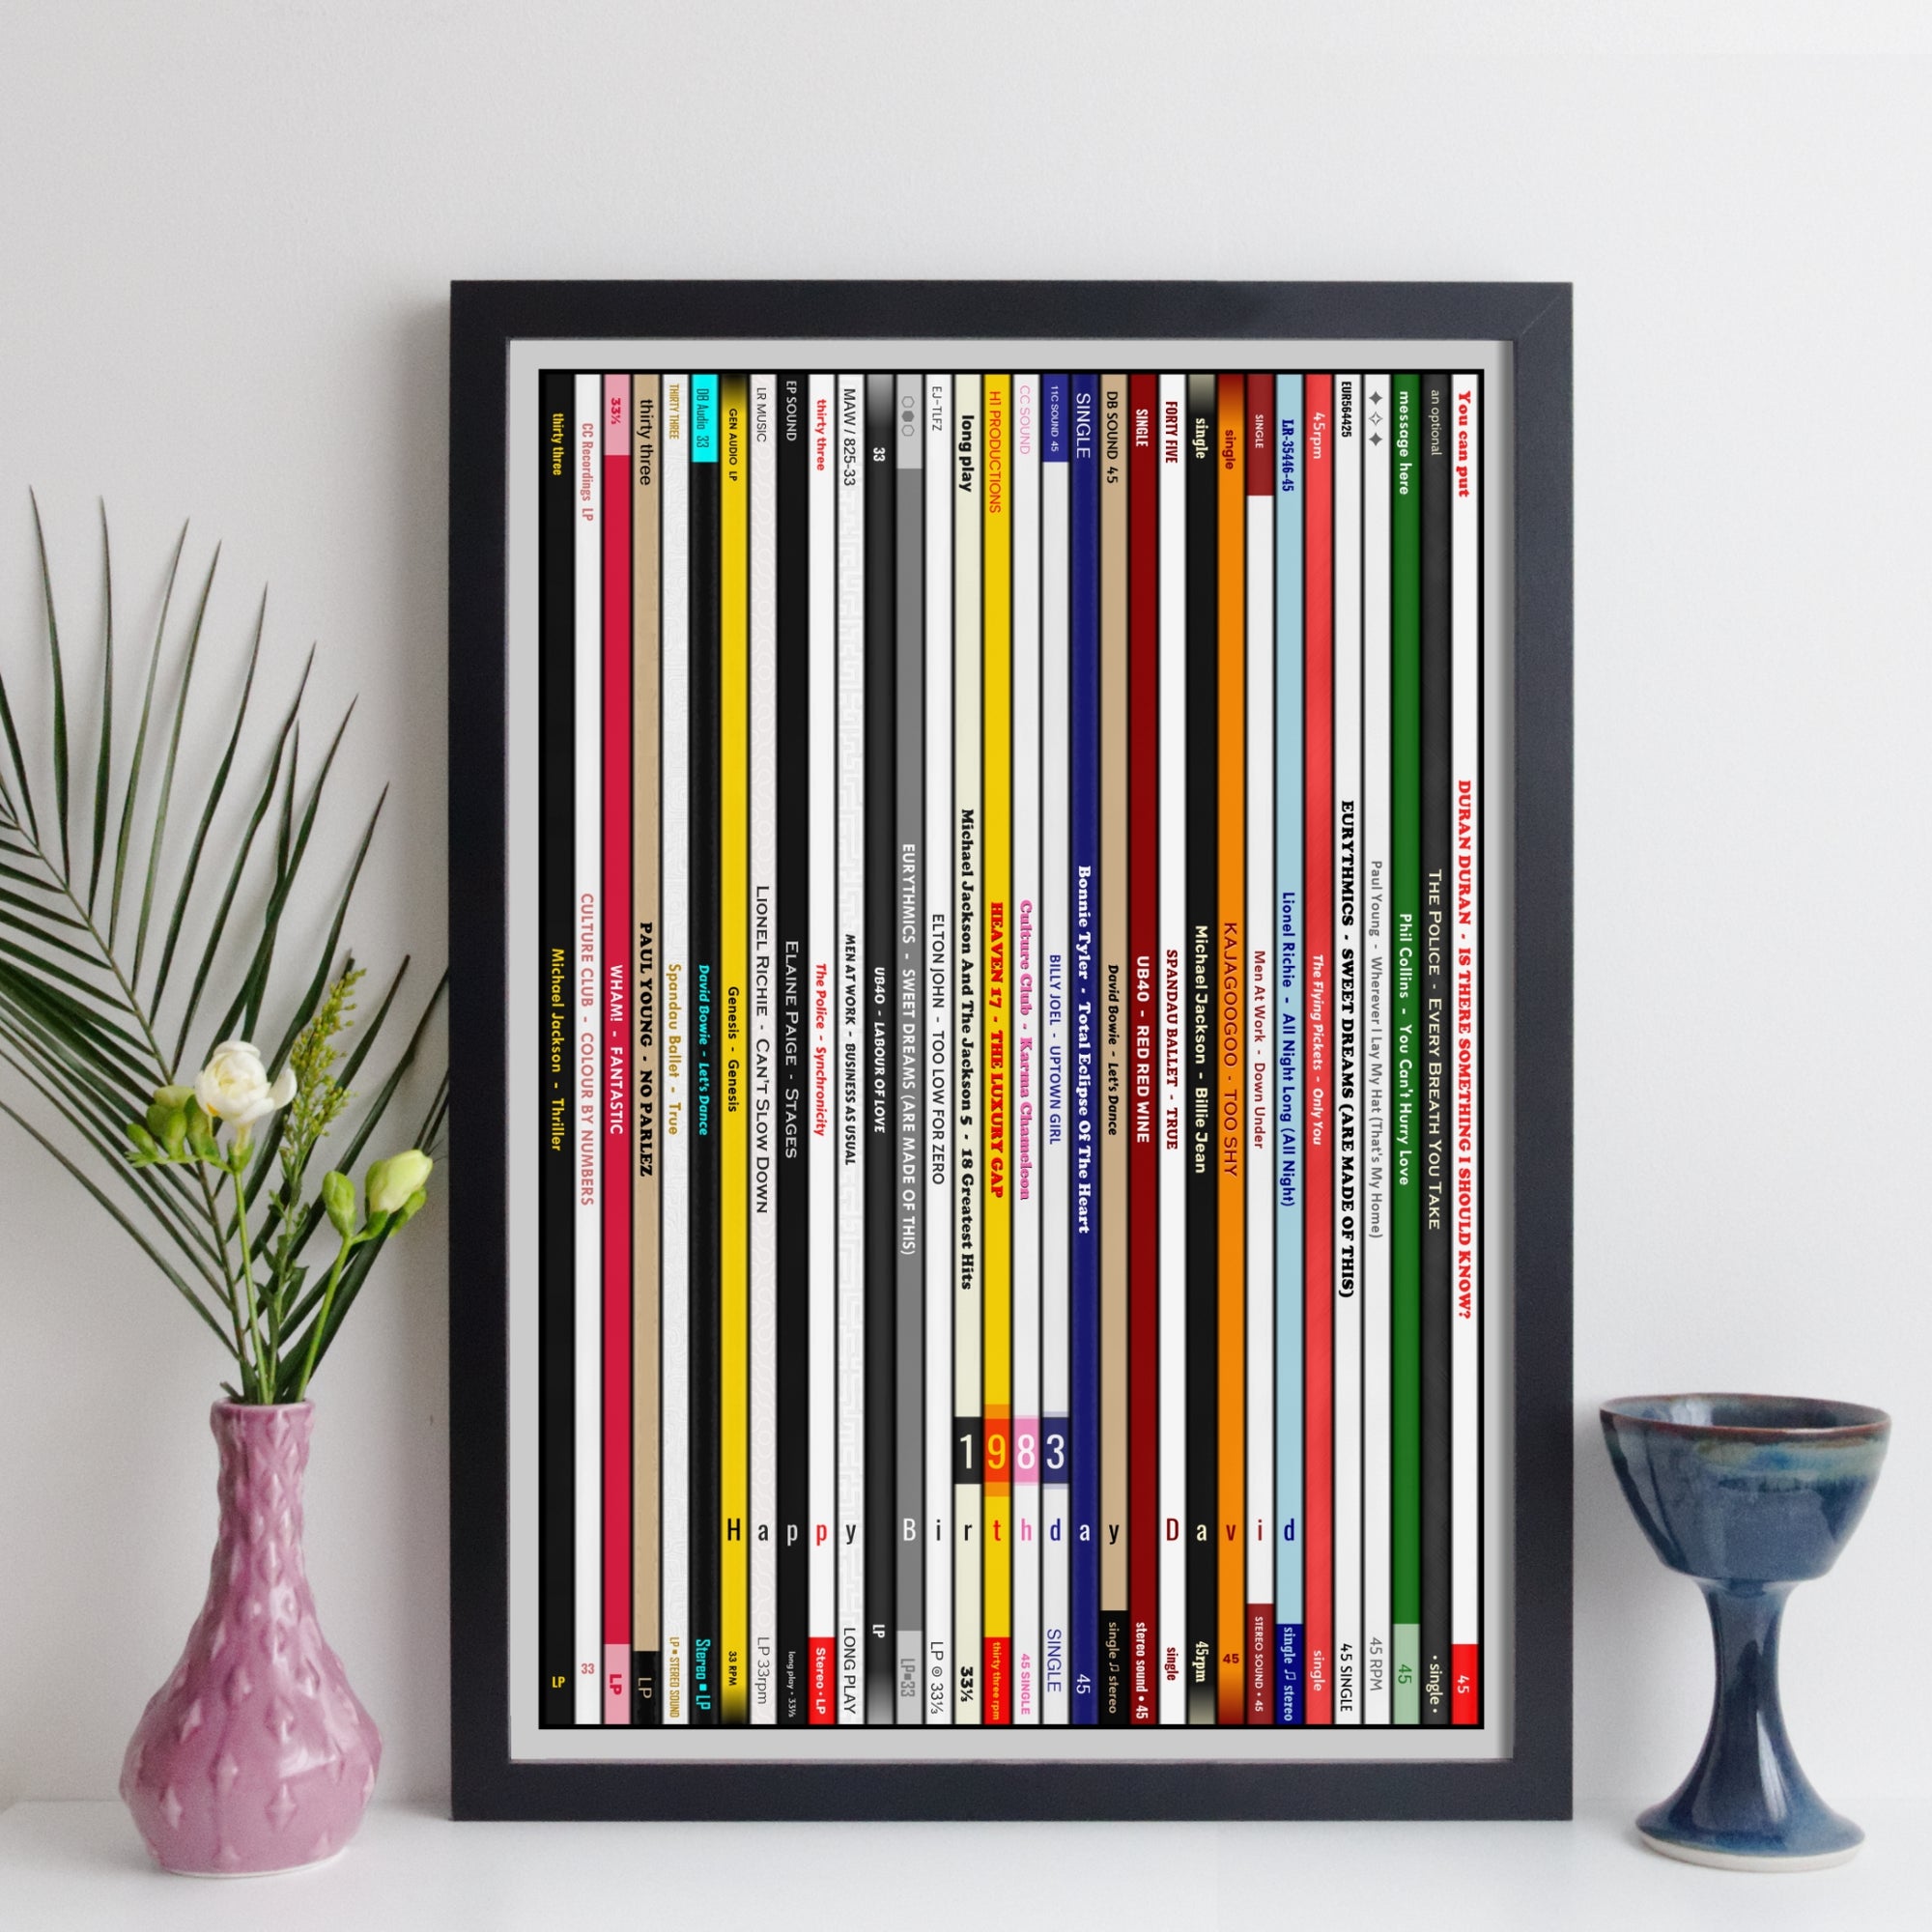 Personalised Music Print - 1983 UK Record Collection Print - 1983 birthday gift idea